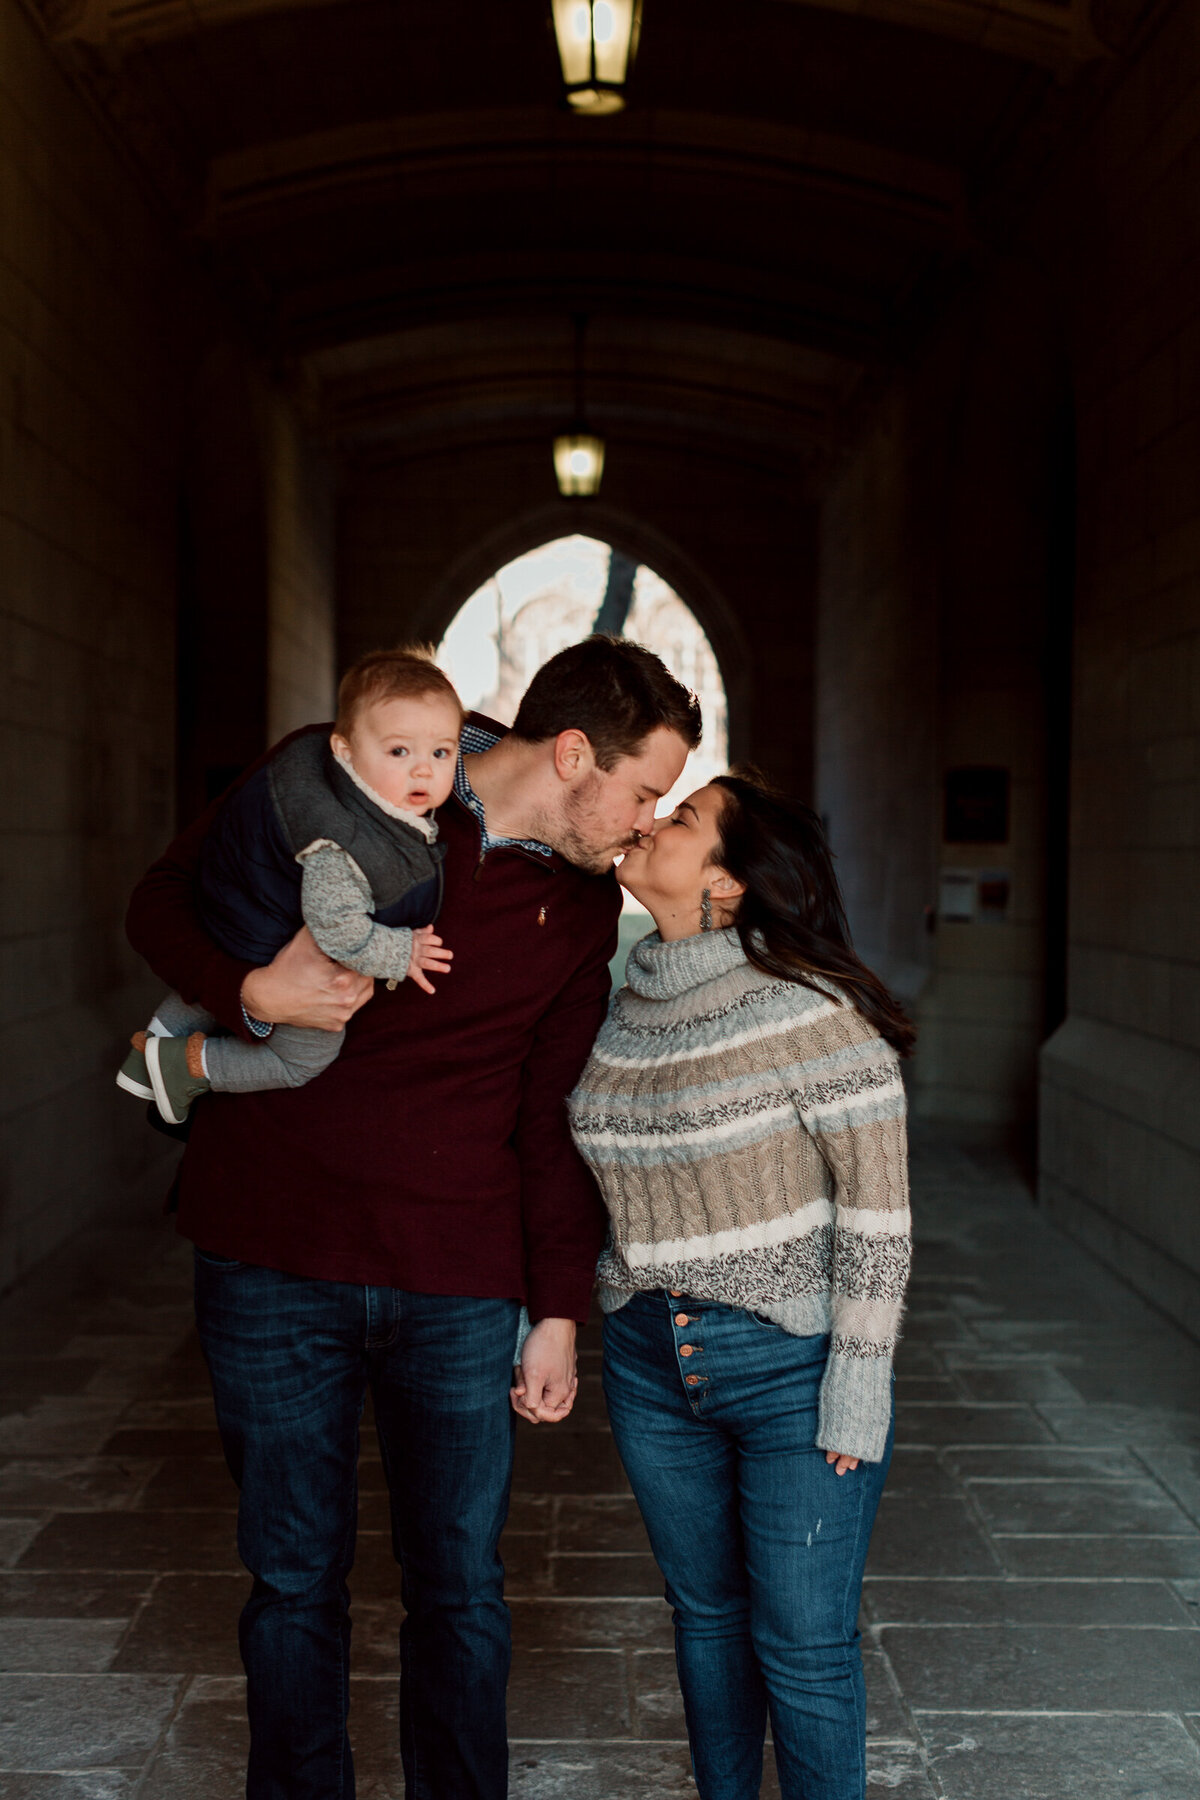 Cristao-Family-Session-University-of-Chicago-46